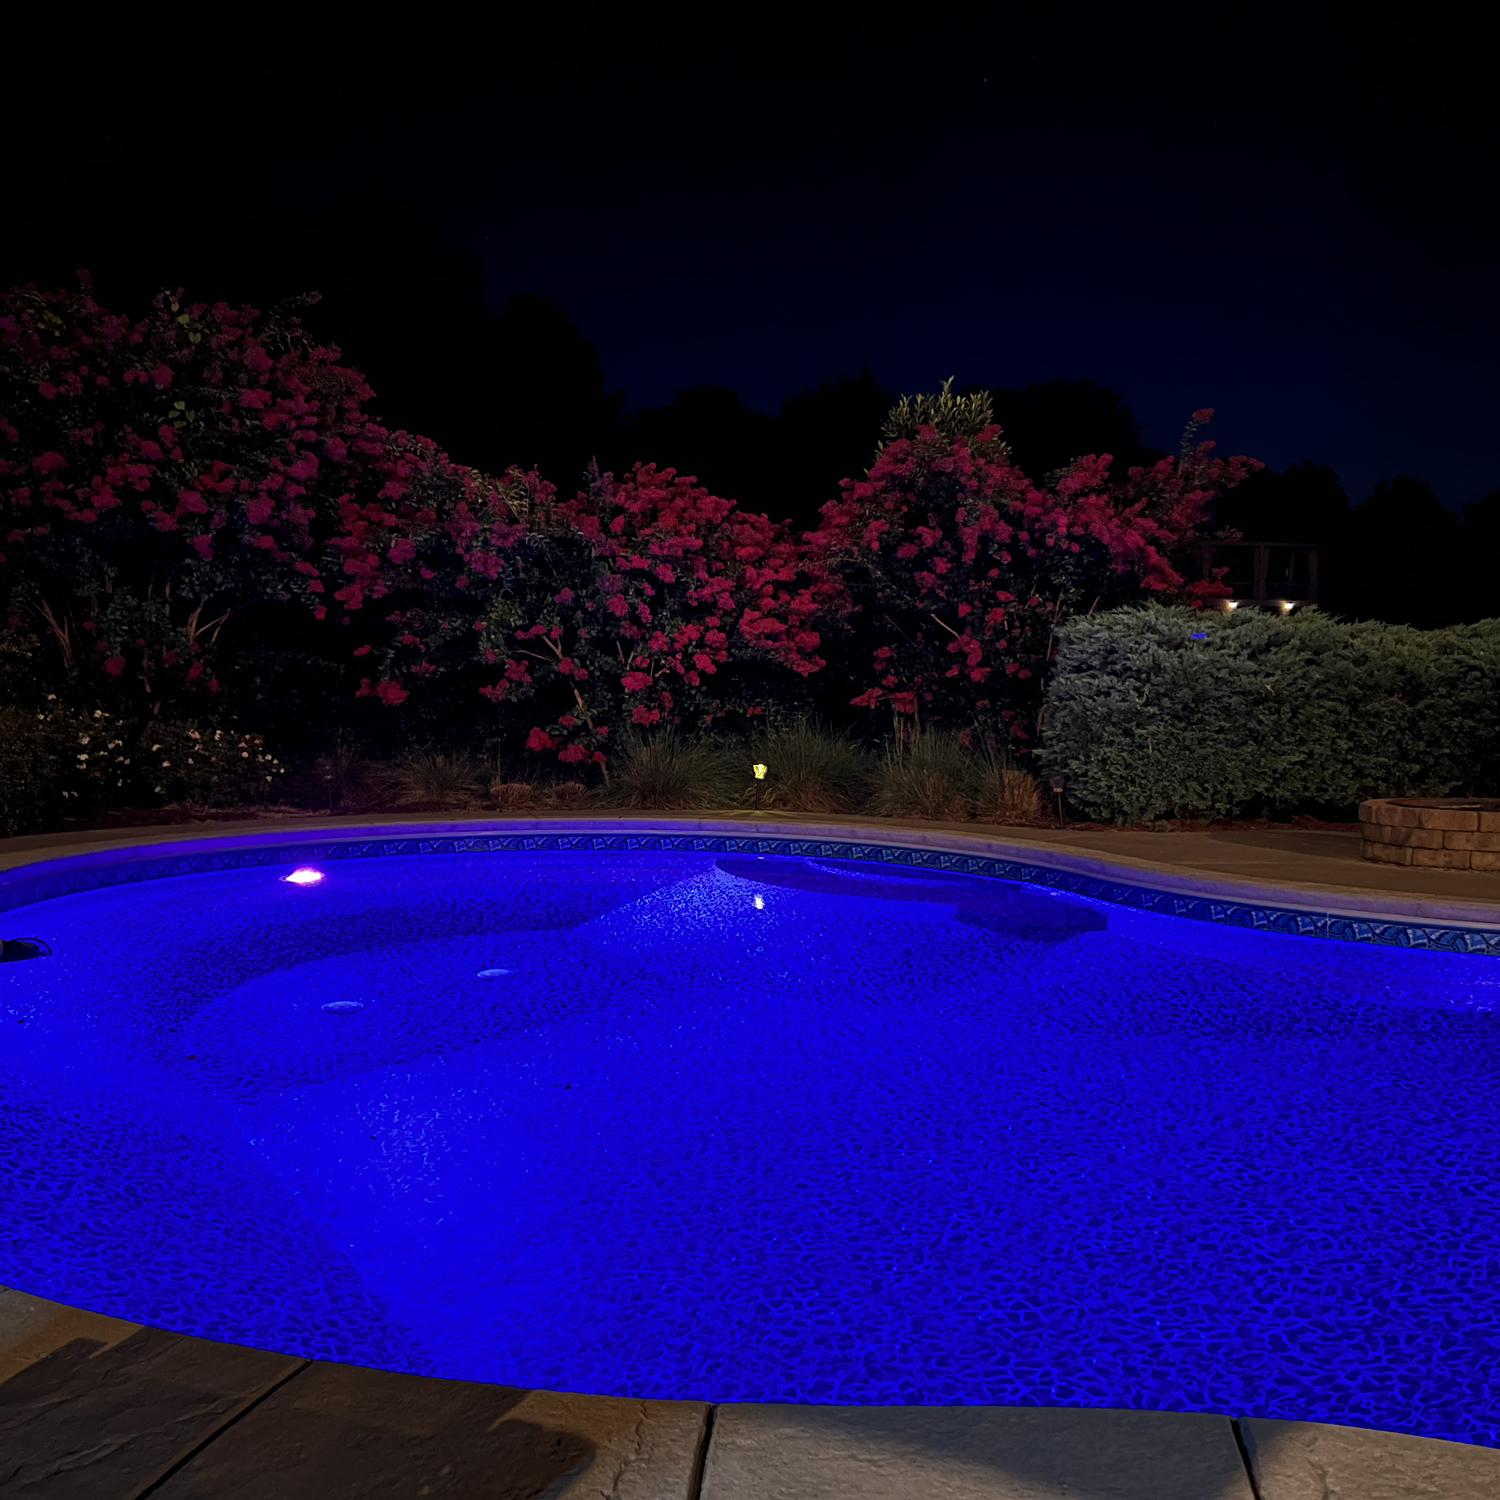 Of course, Jon had to show off the our pool lights… lol